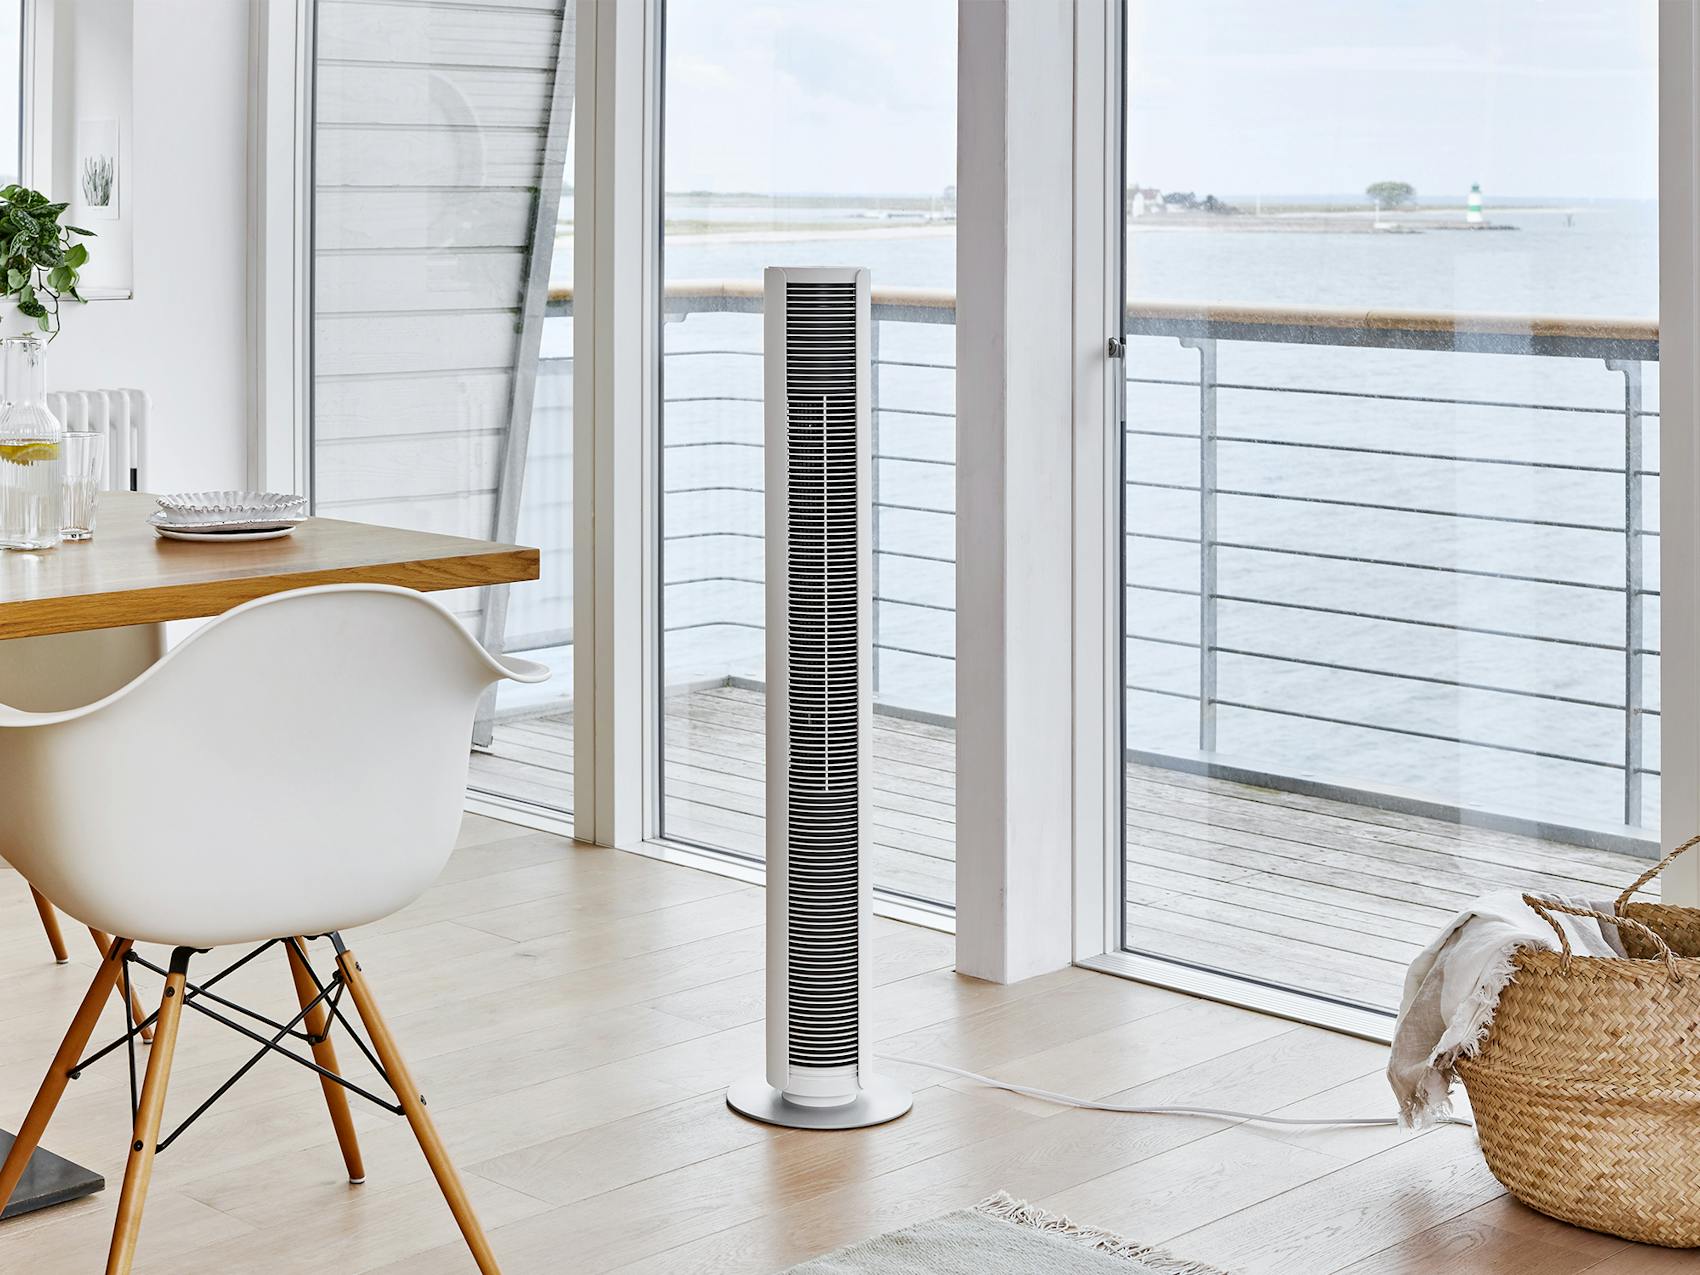 Peter tower fan by Stadler Form in white in a bright dining room